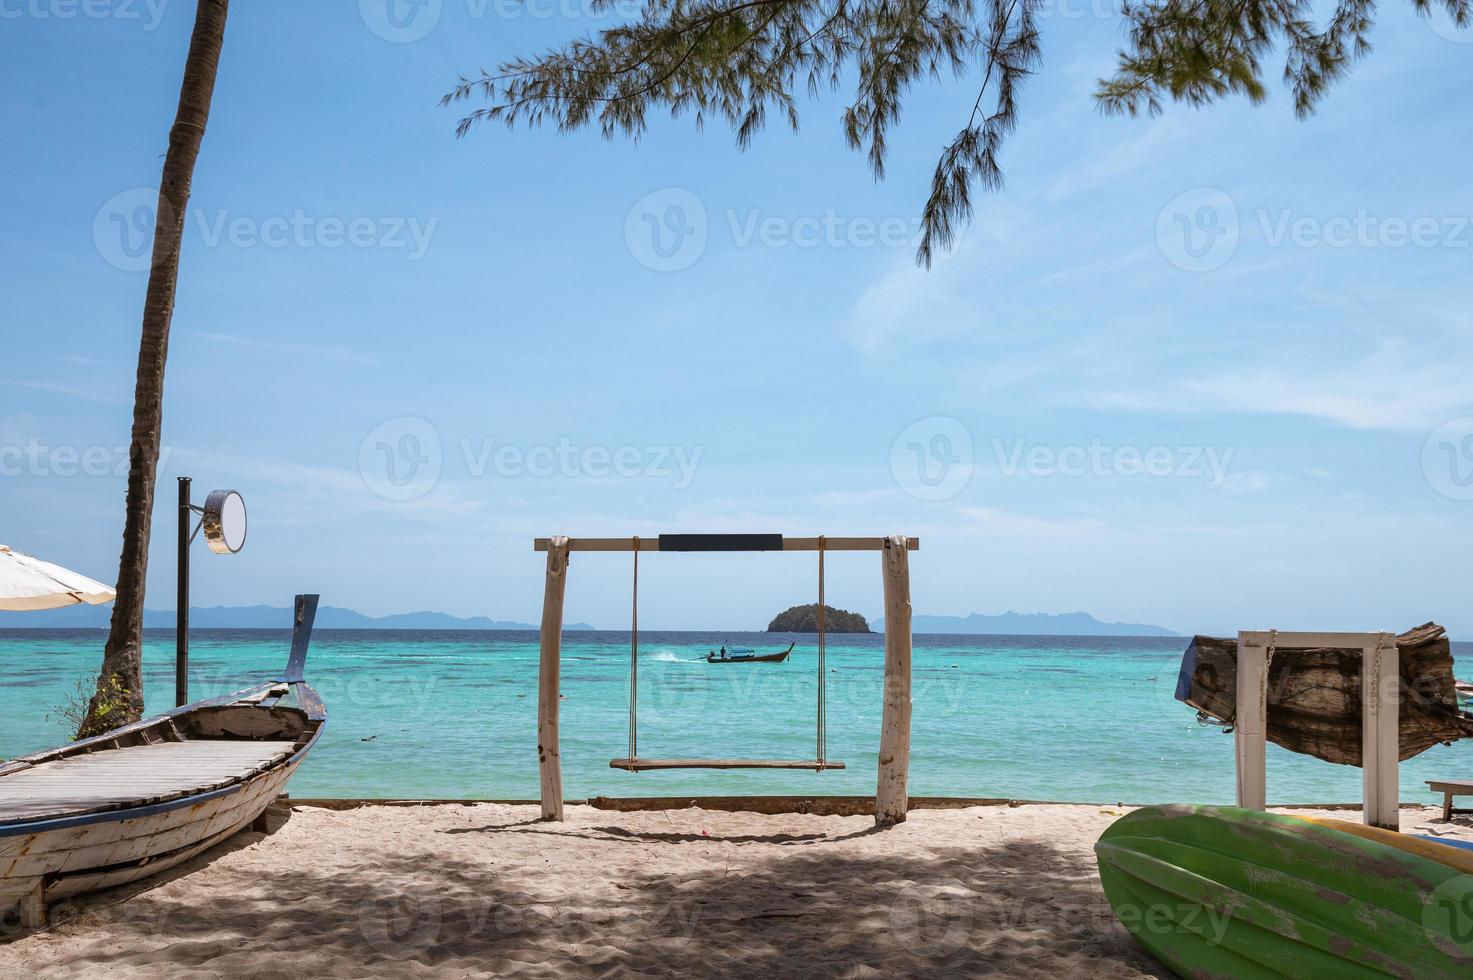 Wooden swing on the beach with wooden boat sailing on tropical sea photo